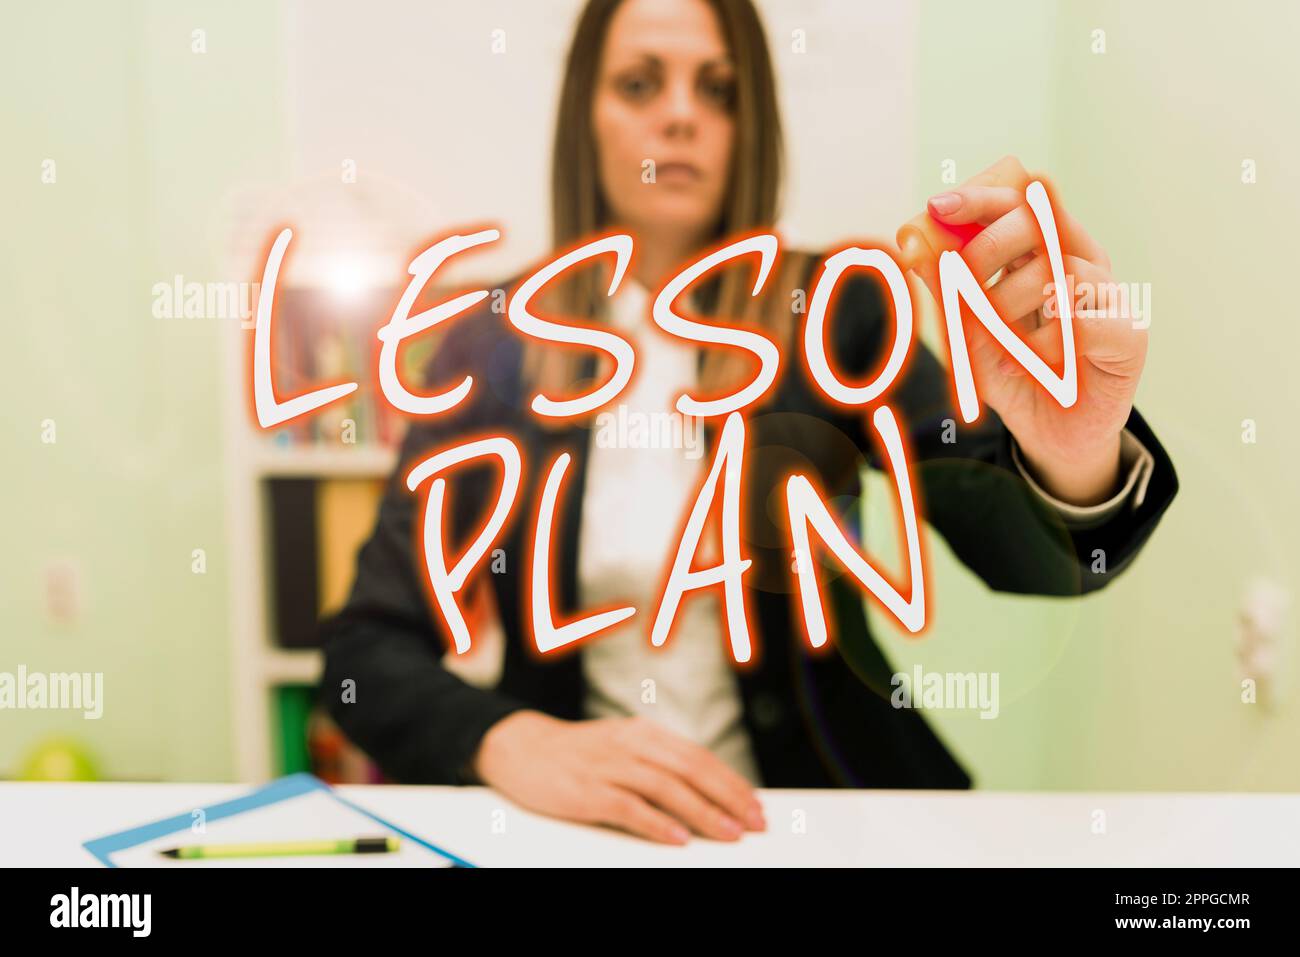 Sign displaying Lesson Plan. Concept meaning a teacher's detailed description of the course of instruction Stock Photo